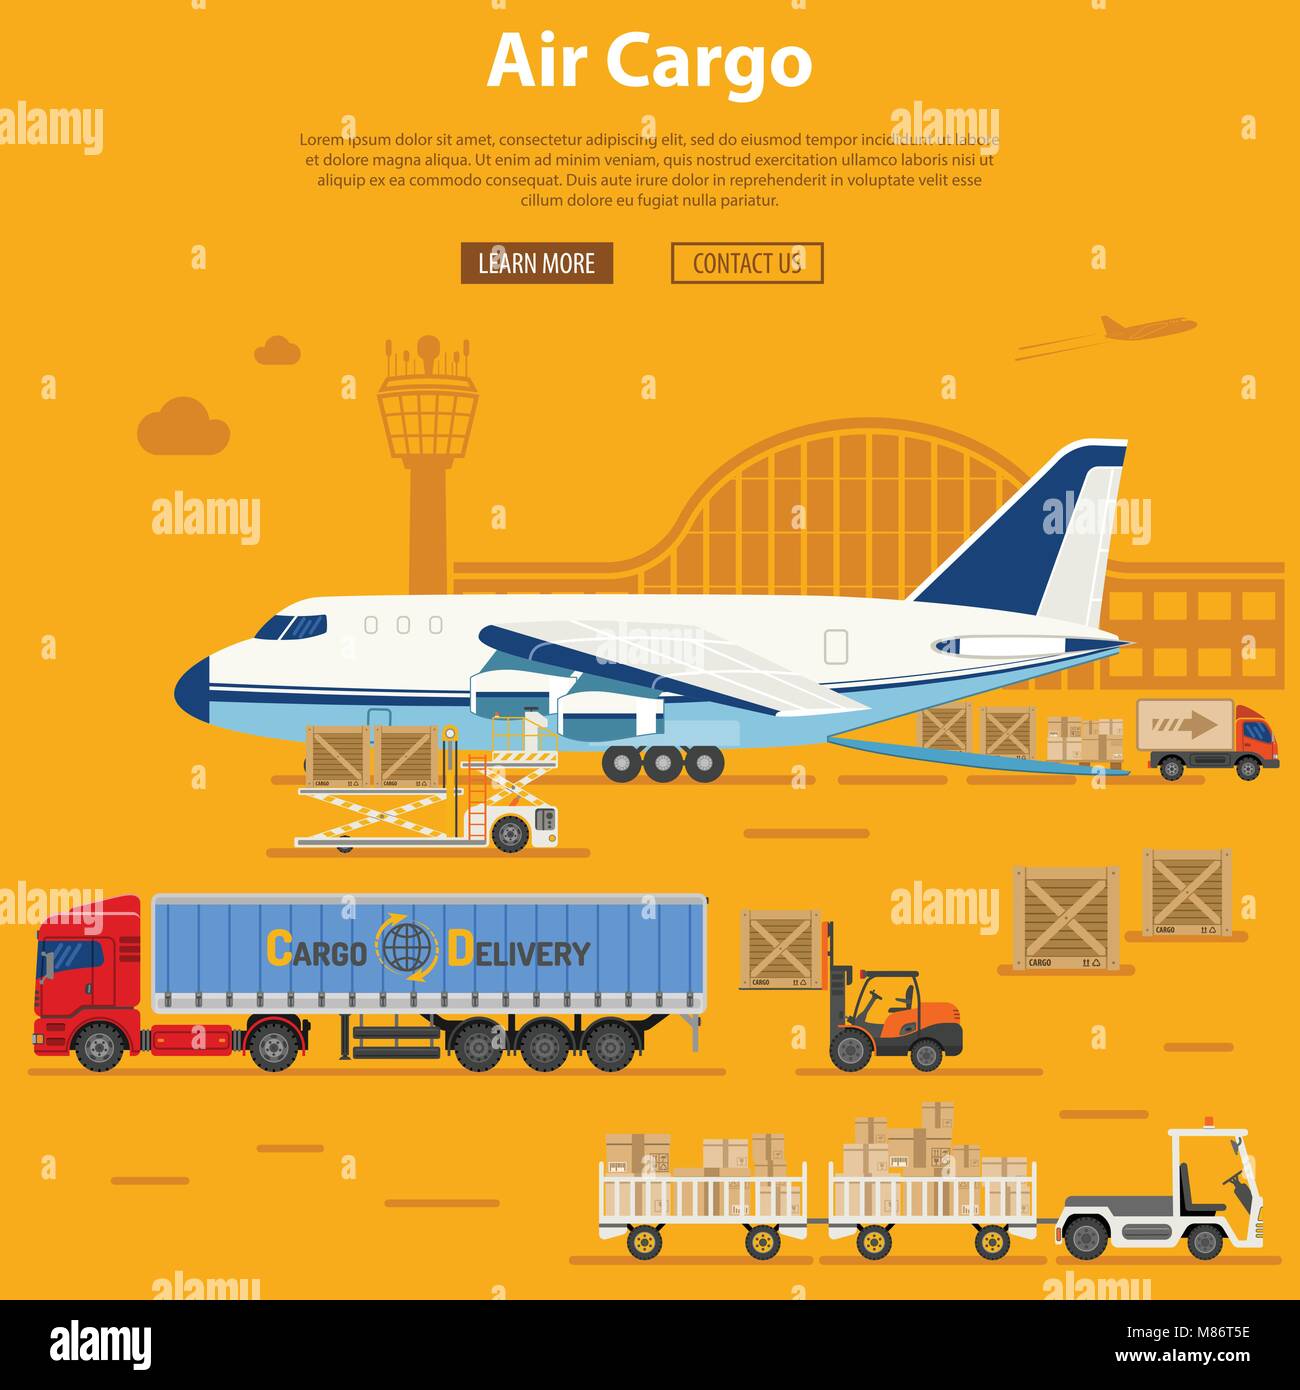 Air Cargo Delivery and Logistics Stock Vector